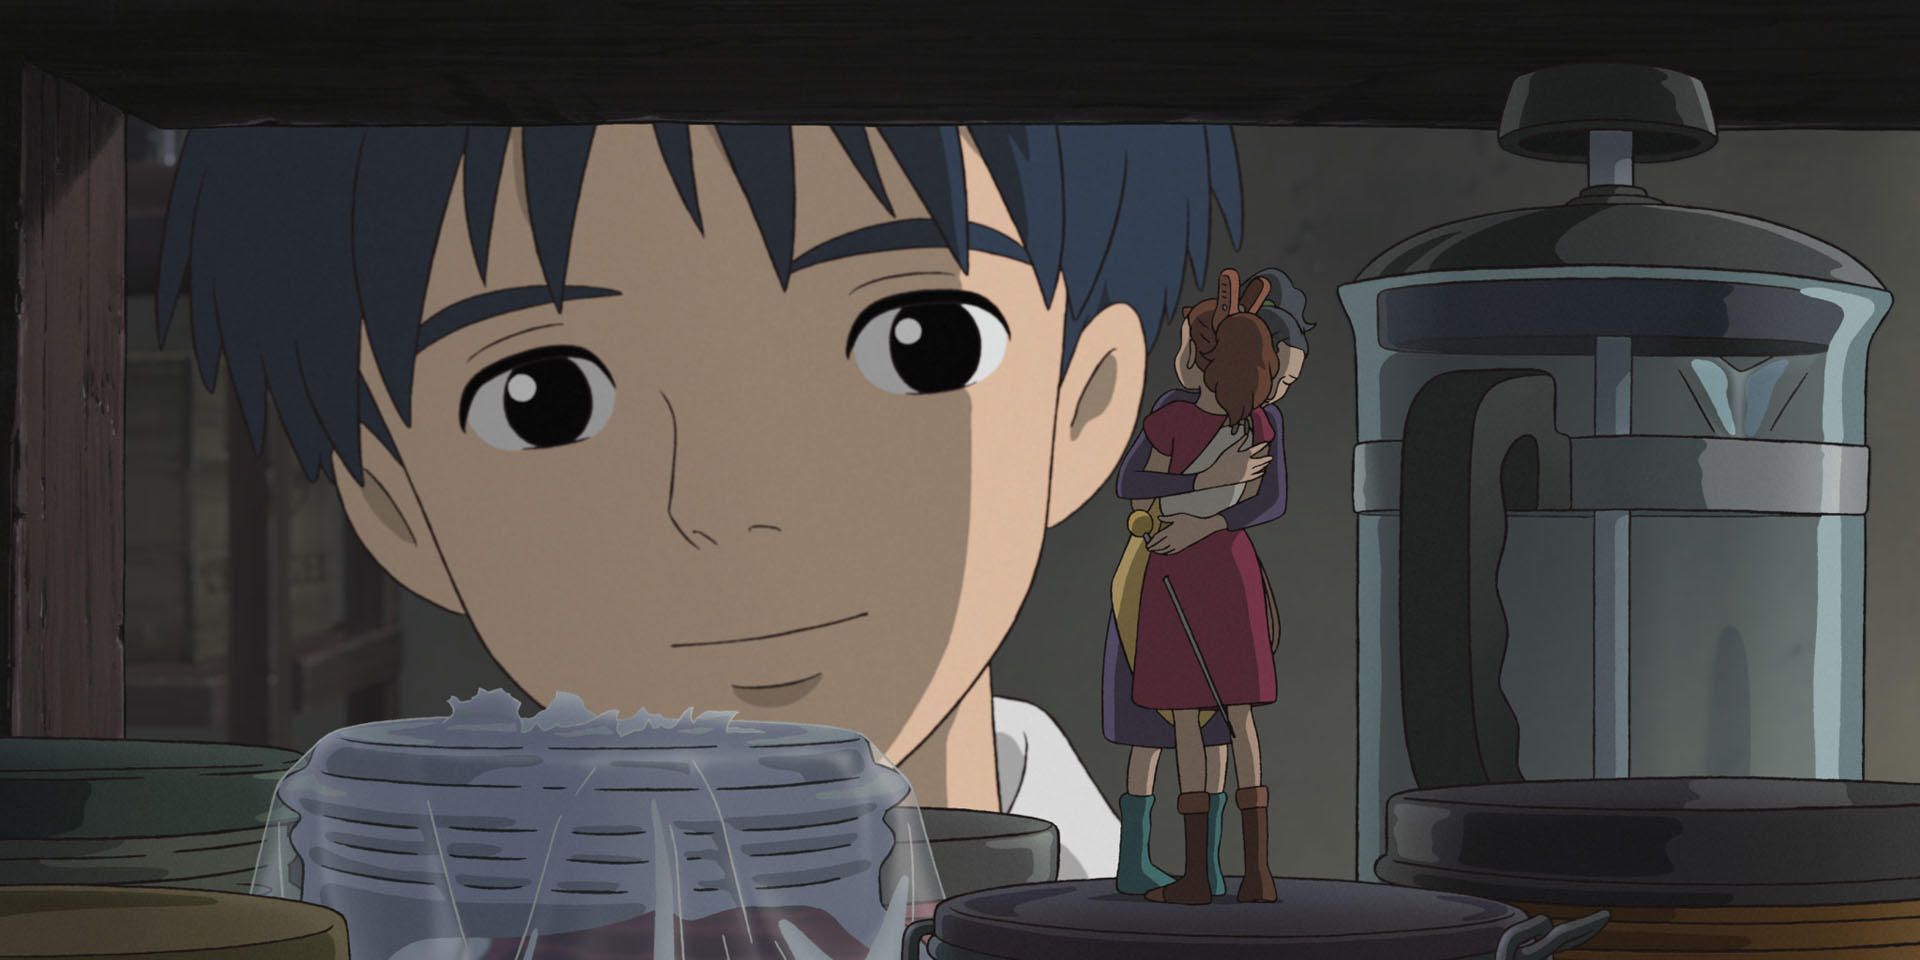 Sho sees Arrietty standing by some kitchen jars